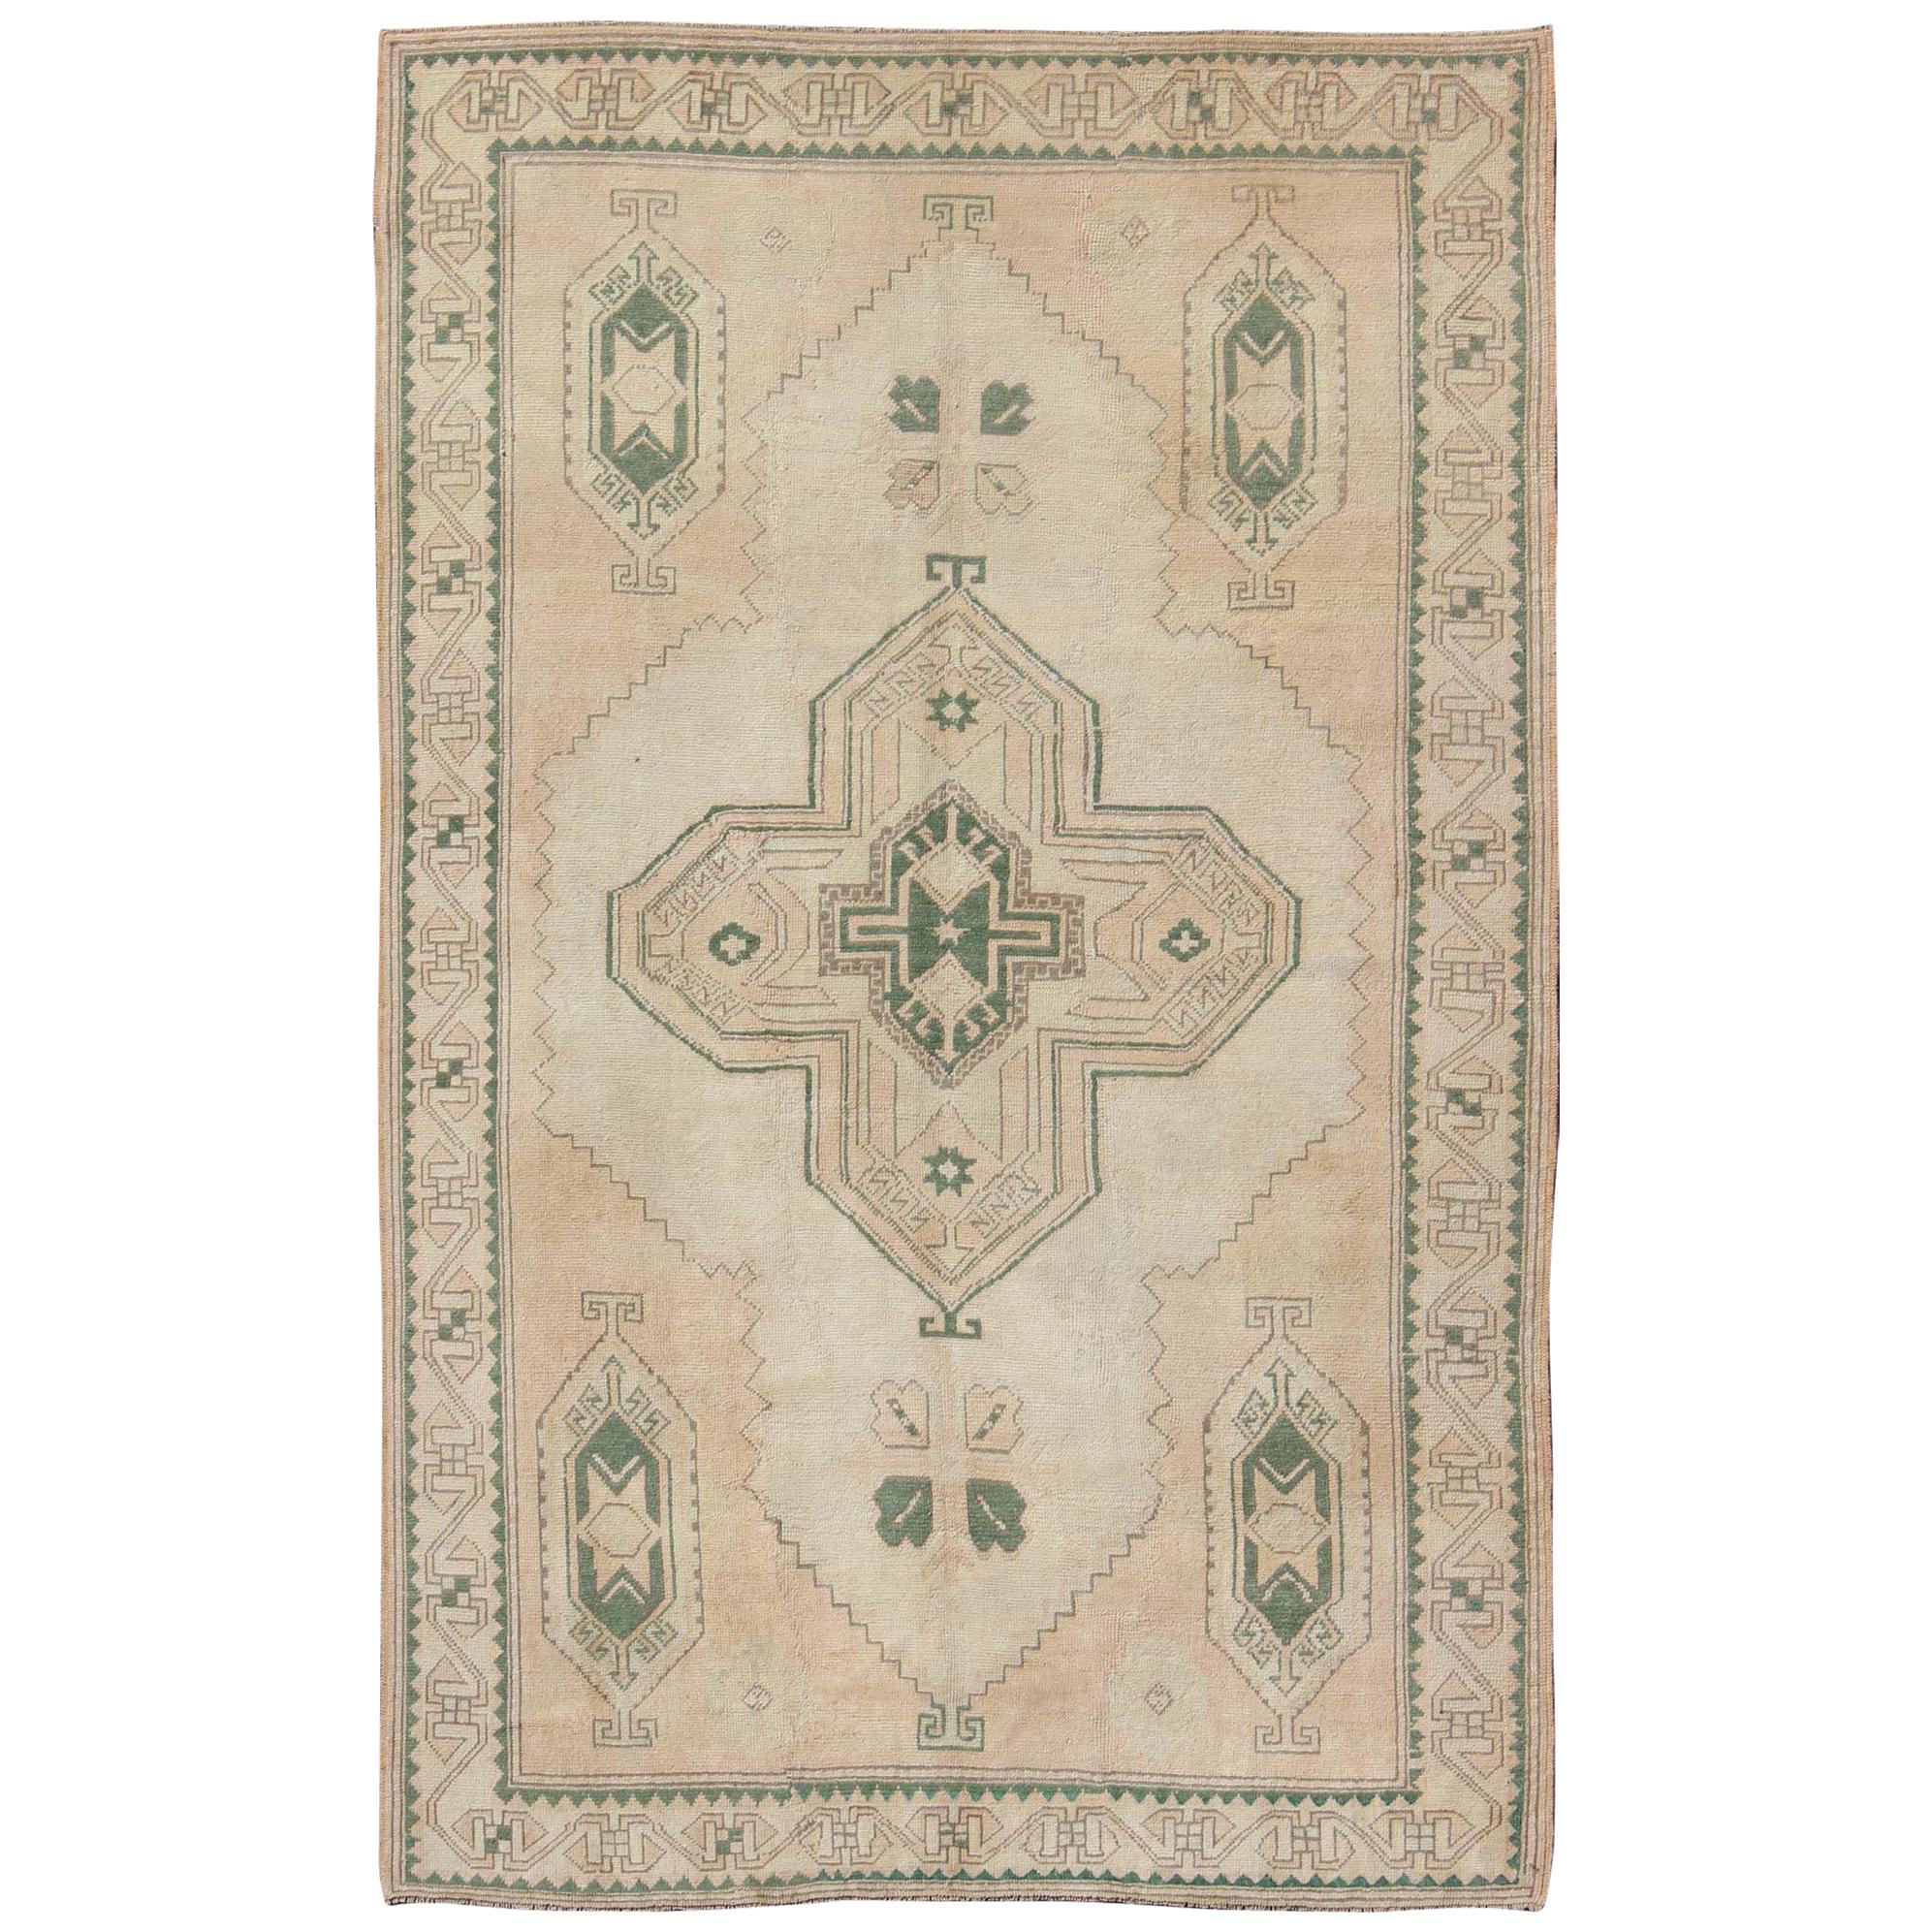 Tribal Turkish Oushak Rug in Green, Light Peach and Cream with Cross Medallion